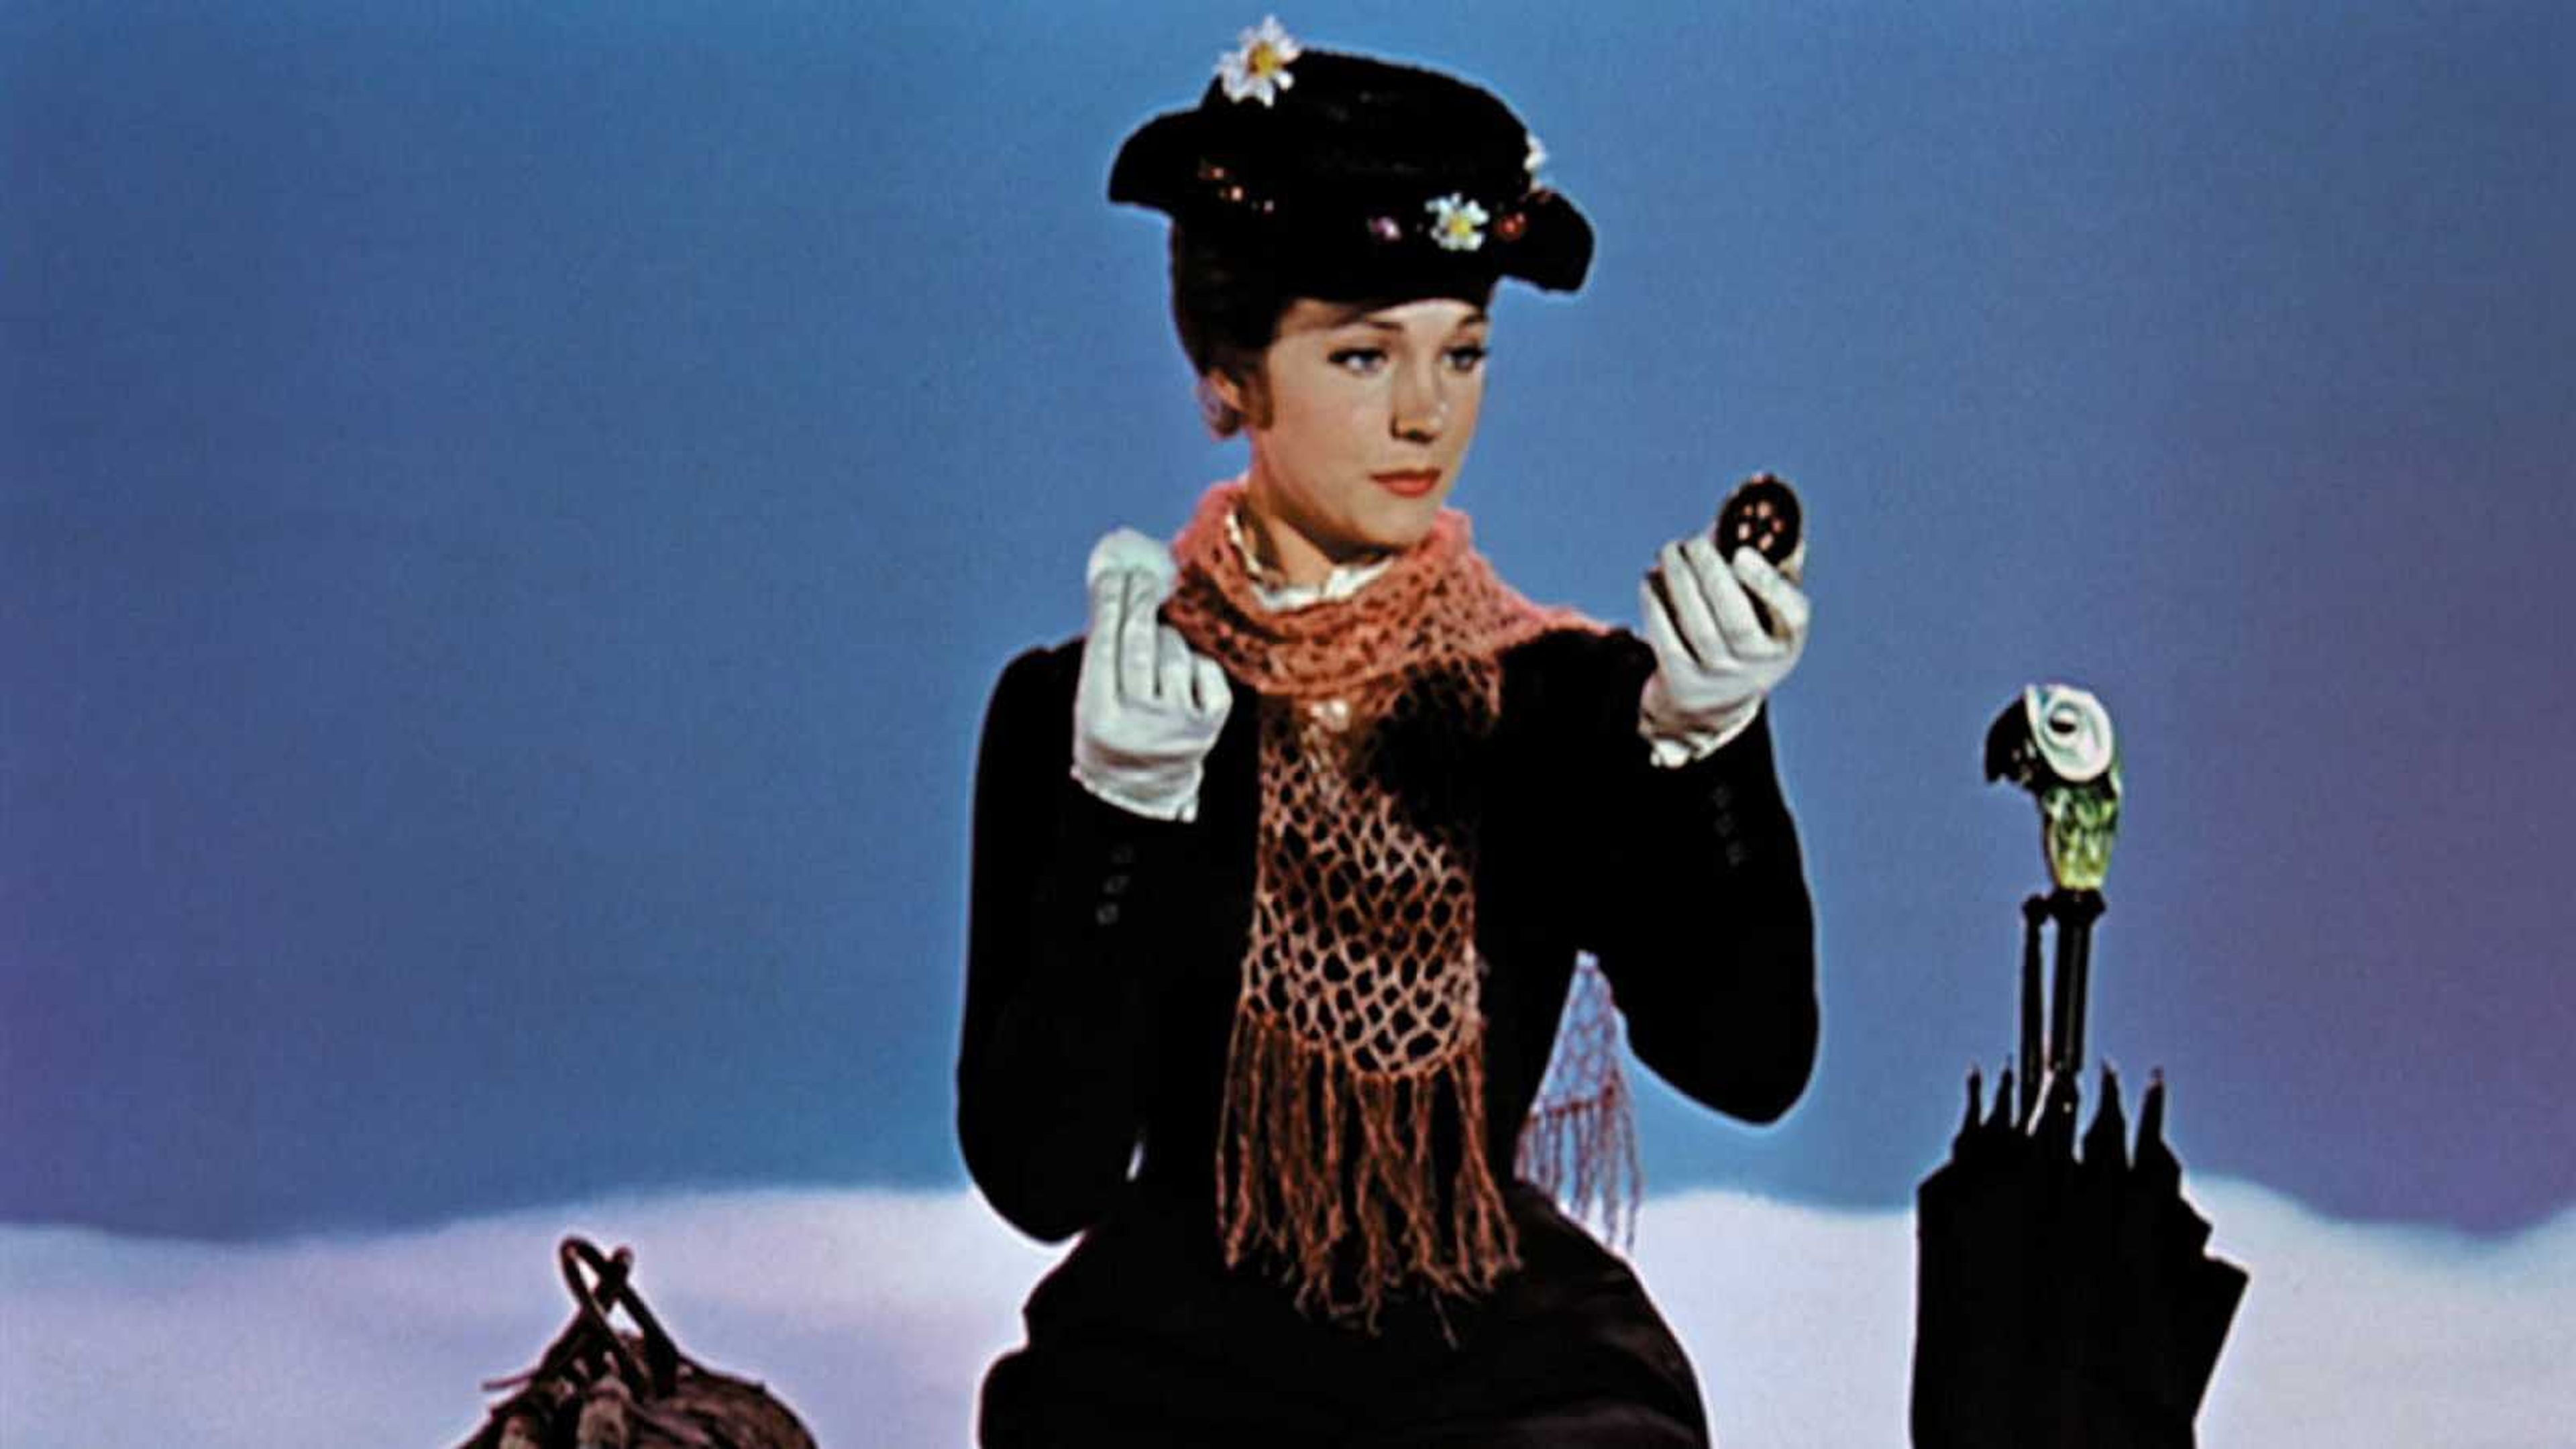 Mary Poppins - Julie Andrews